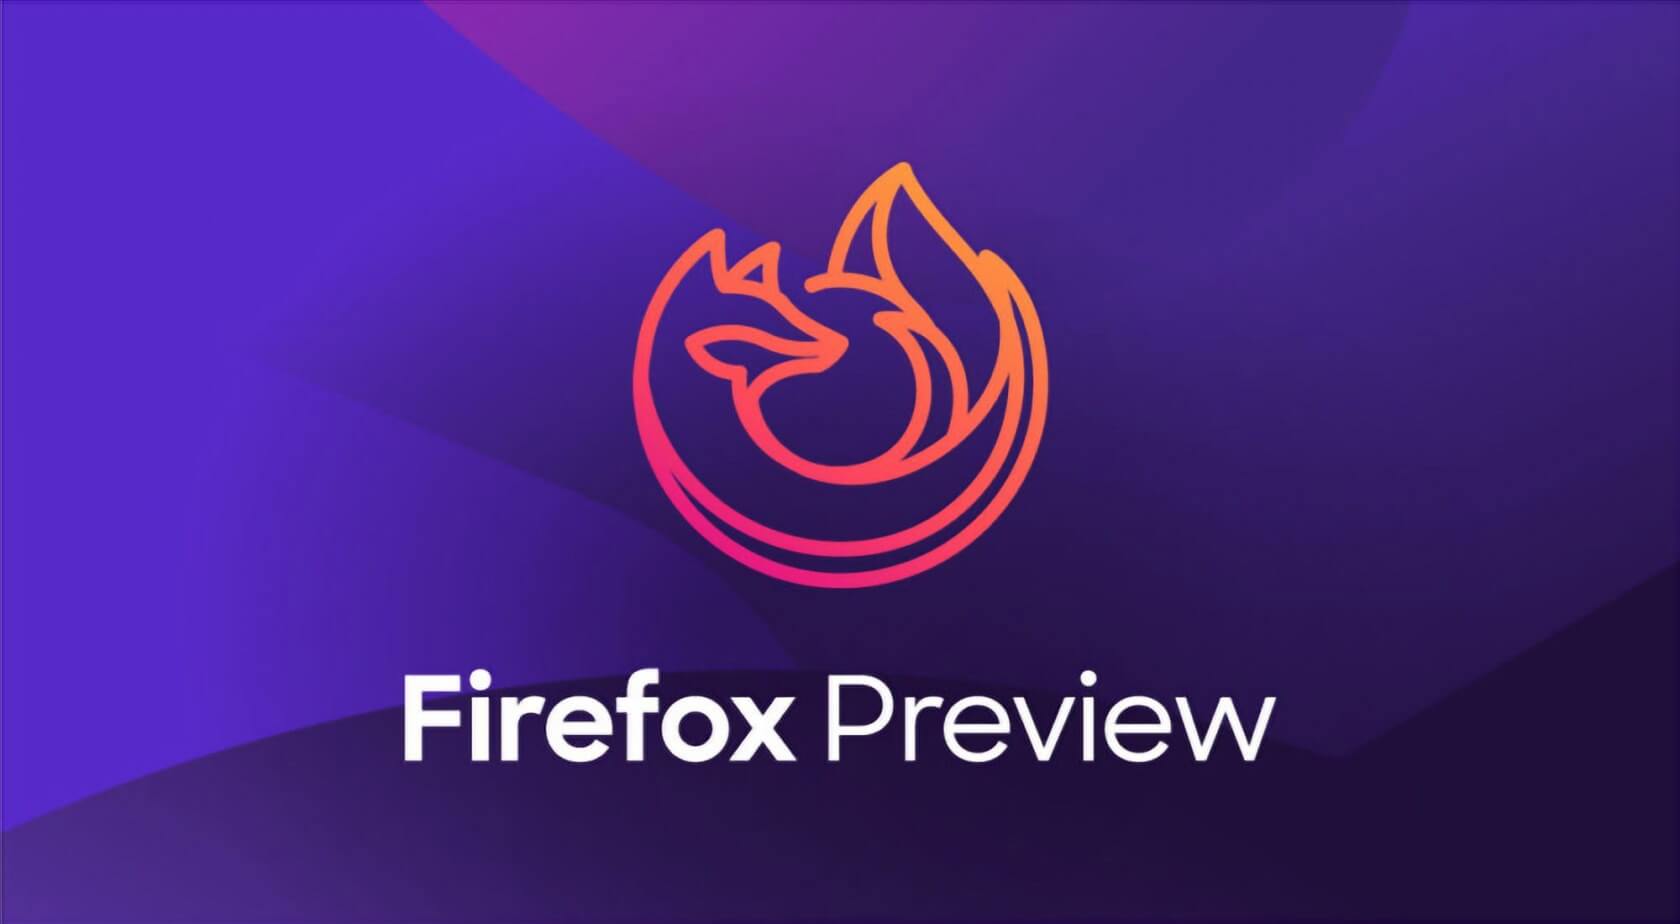 Mozilla launches Firefox Preview, a 'new and improved' Firefox for mobile